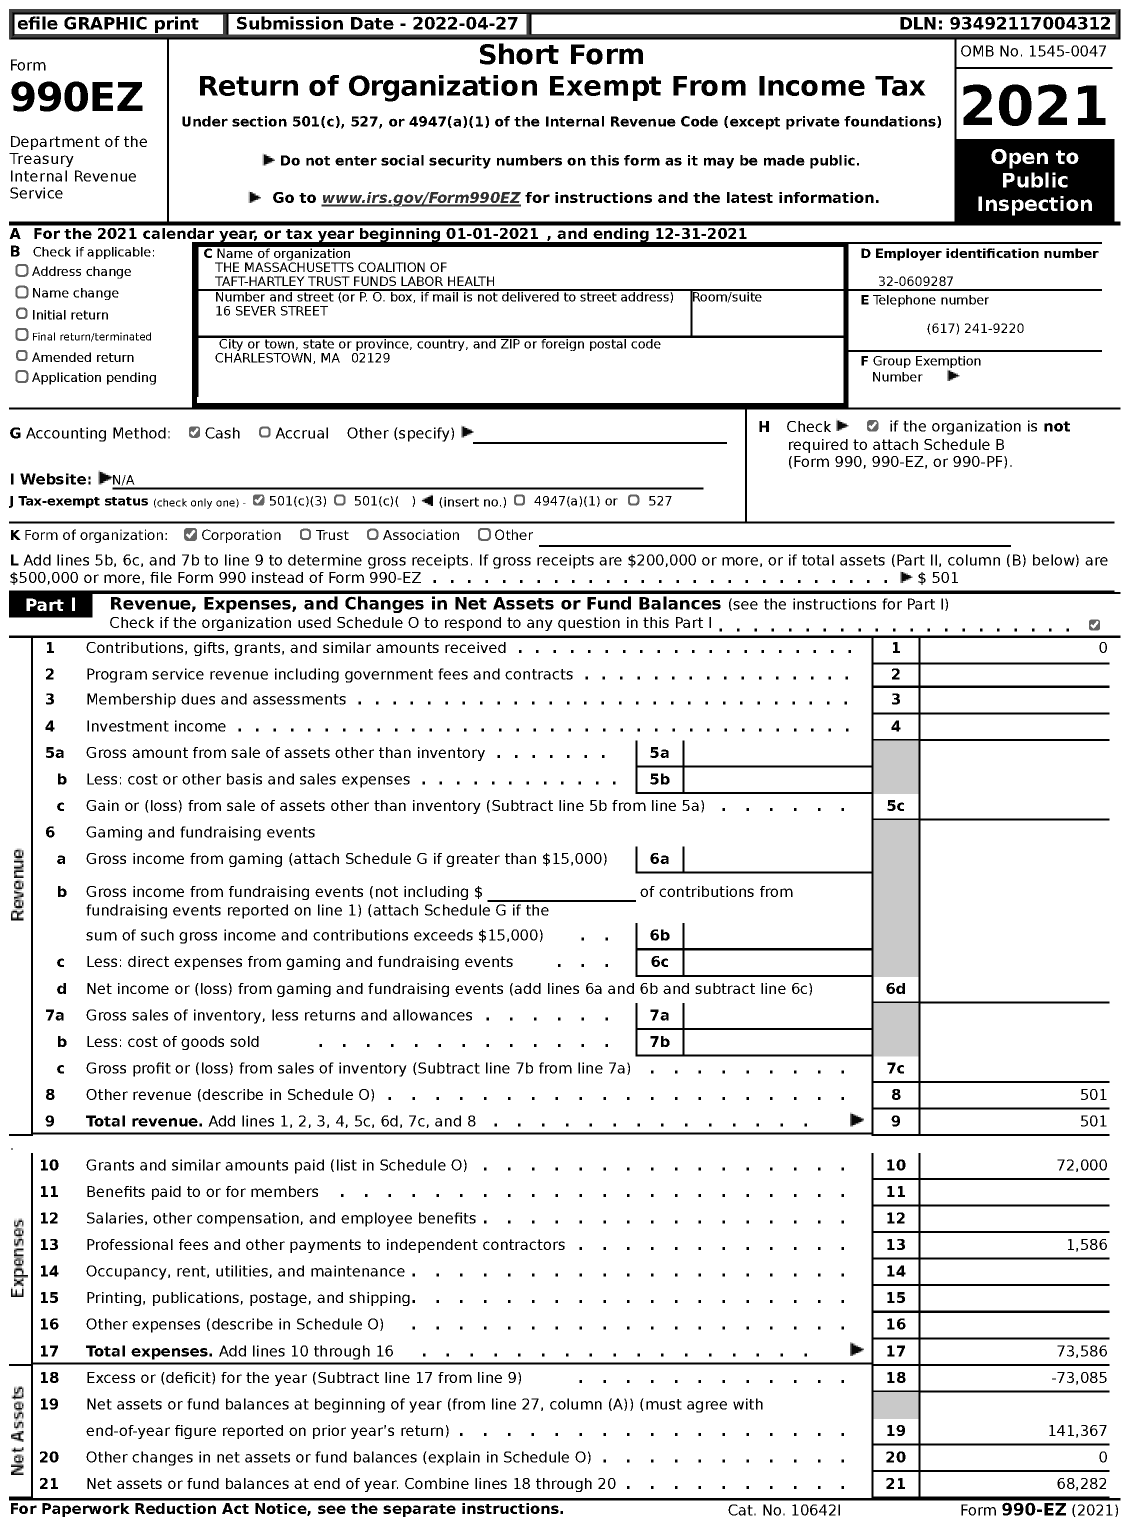 Image of first page of 2021 Form 990EZ for The Massachusetts Coalition of Taft-Hartley Trust Funds Labor Health